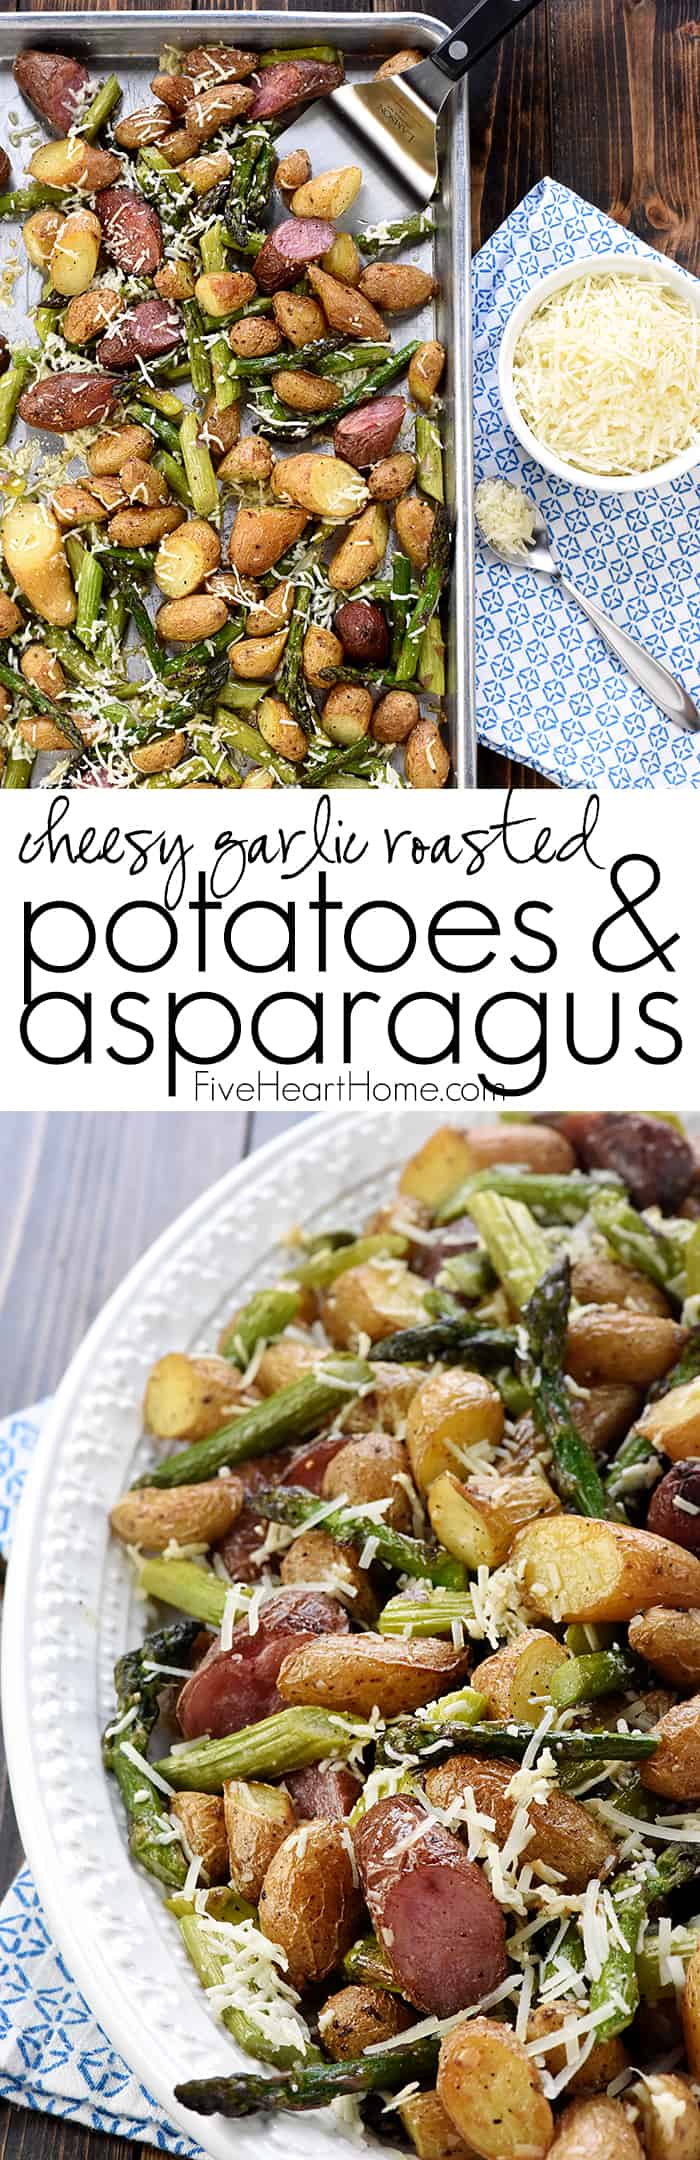 Cheesy Garlic Roasted Potatoes & Asparagus ~ an easy, one-pan, spring side dish recipe that makes a gorgeous, delicious addition to a special Easter meal or a regular weeknight dinner! | FiveHeartHome.com via @fivehearthome